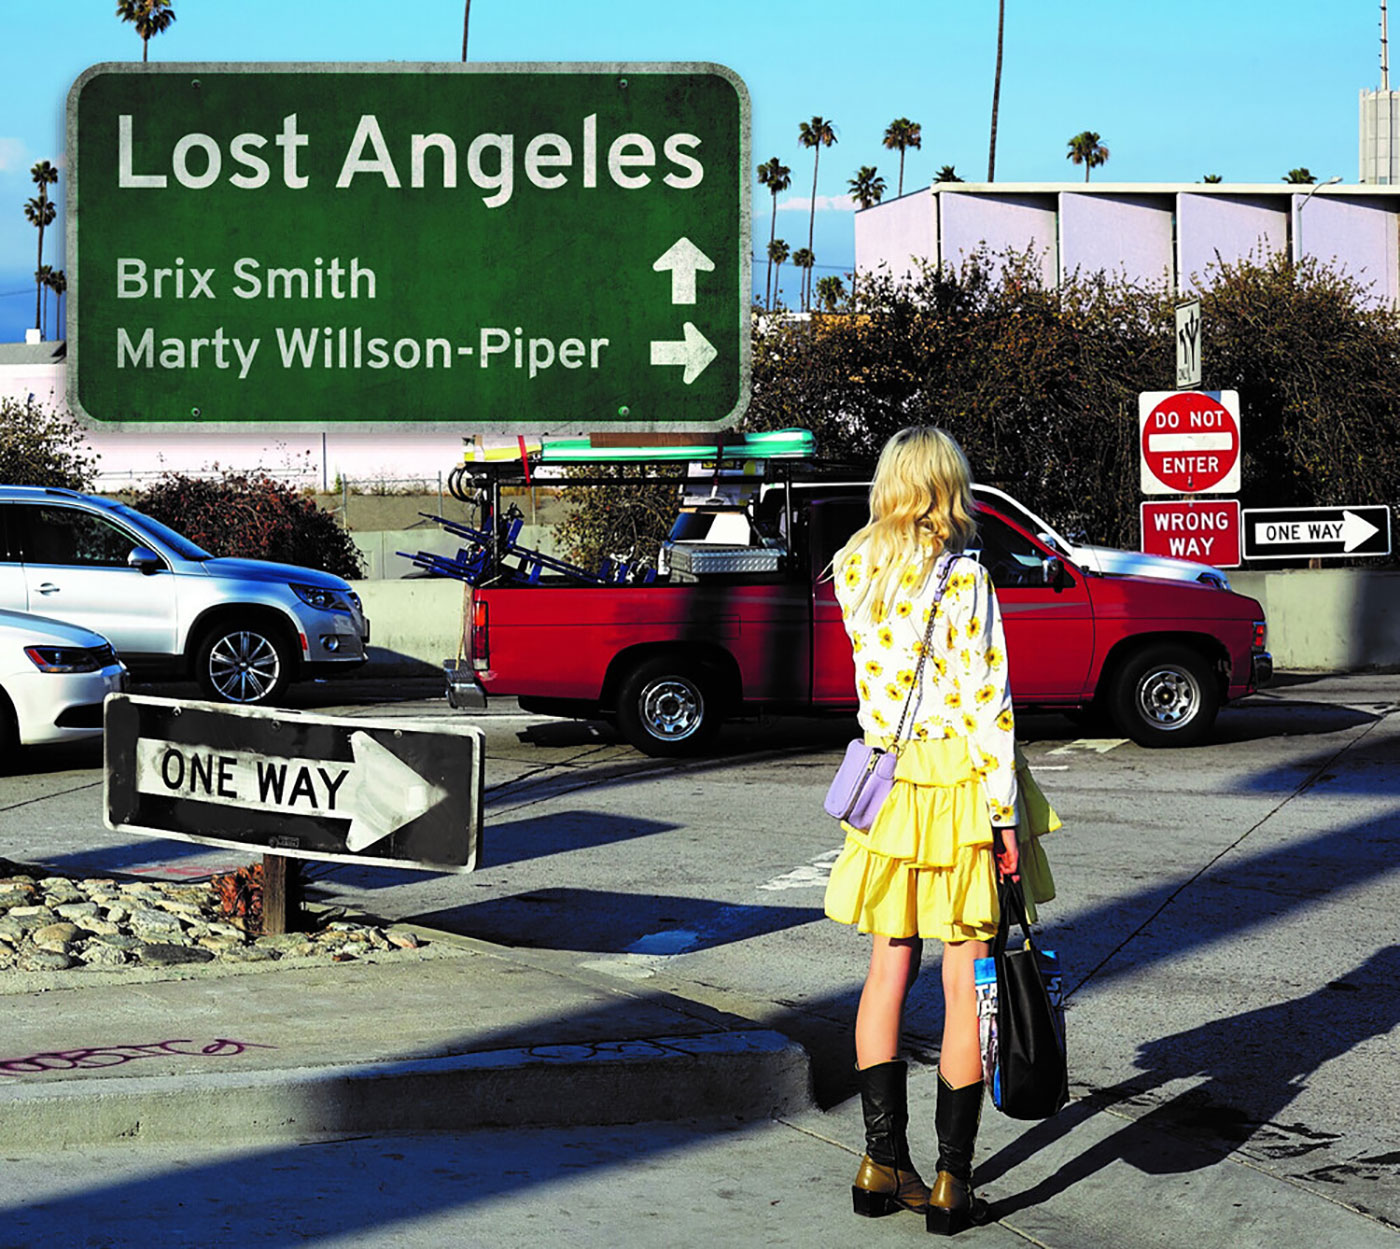 Brix Smith And Marty Willson-Piper - Lost Angeles